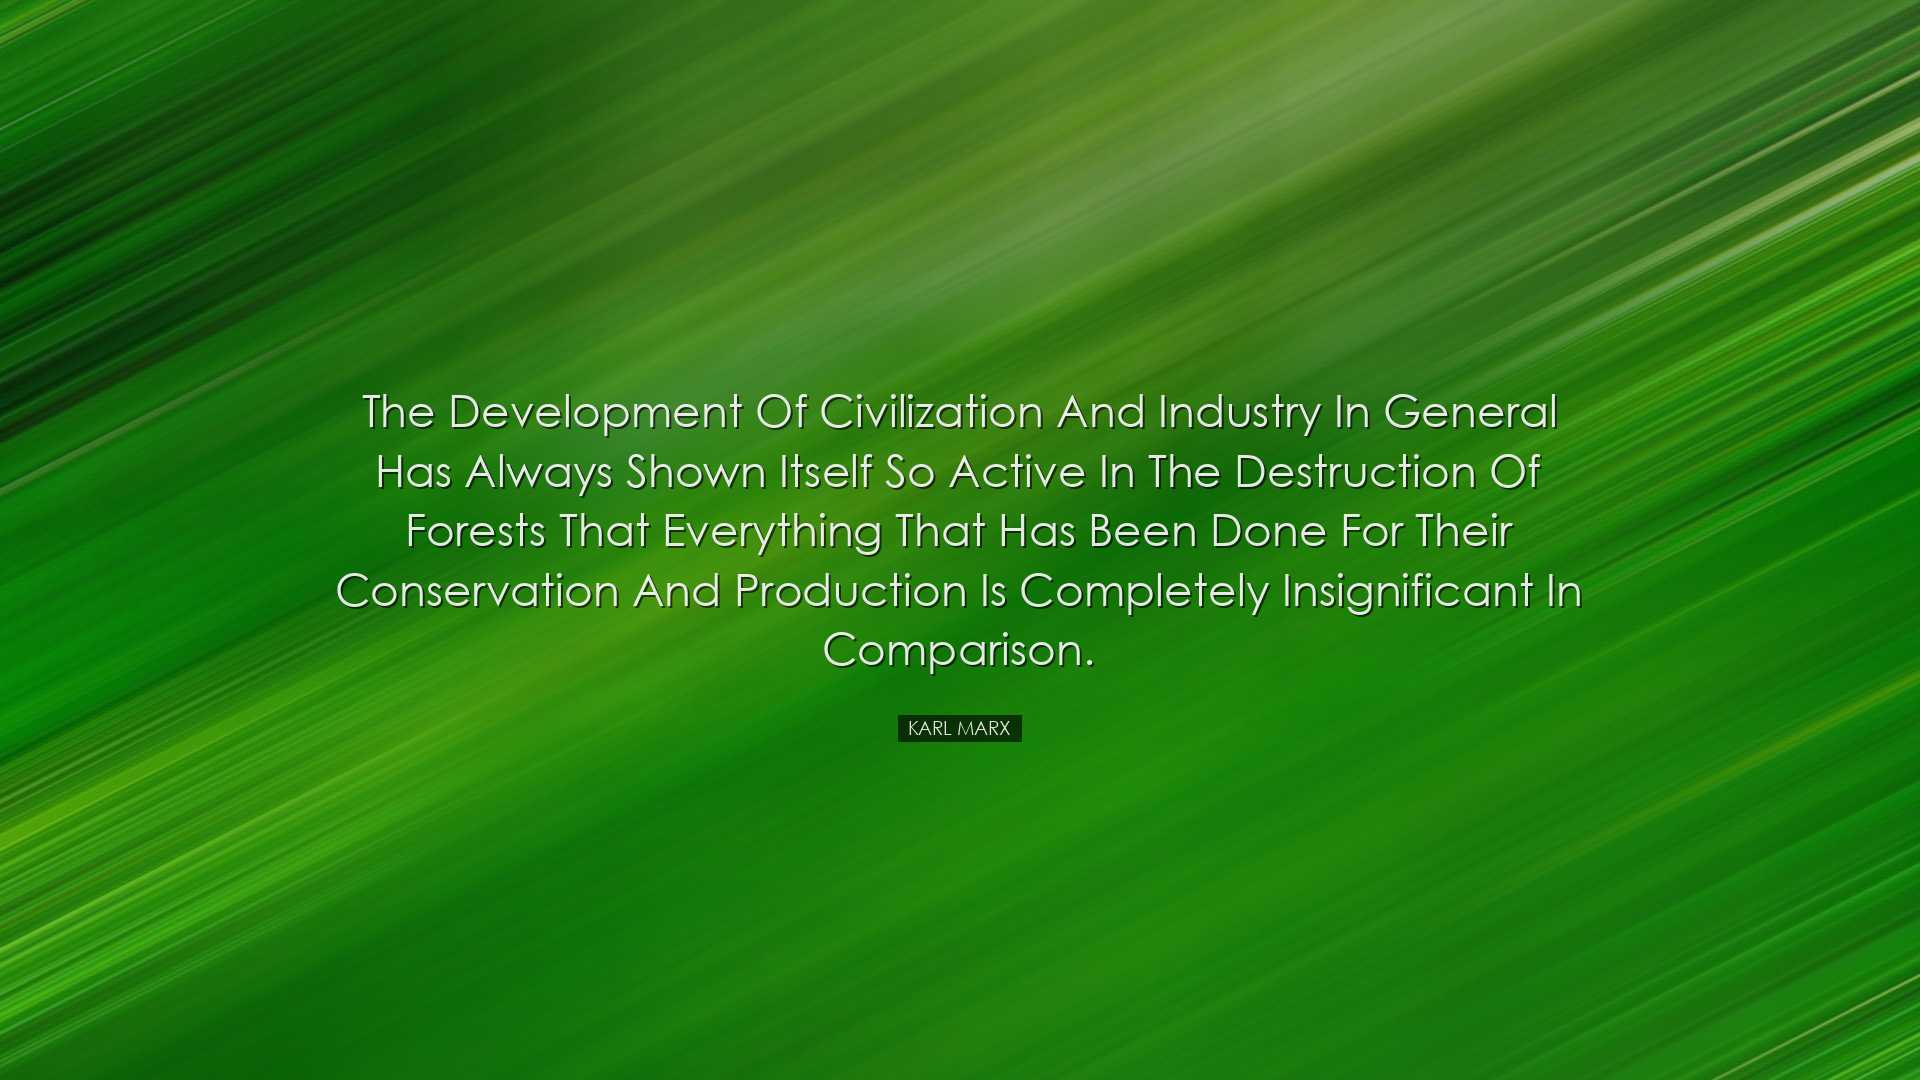 The development of civilization and industry in general has always